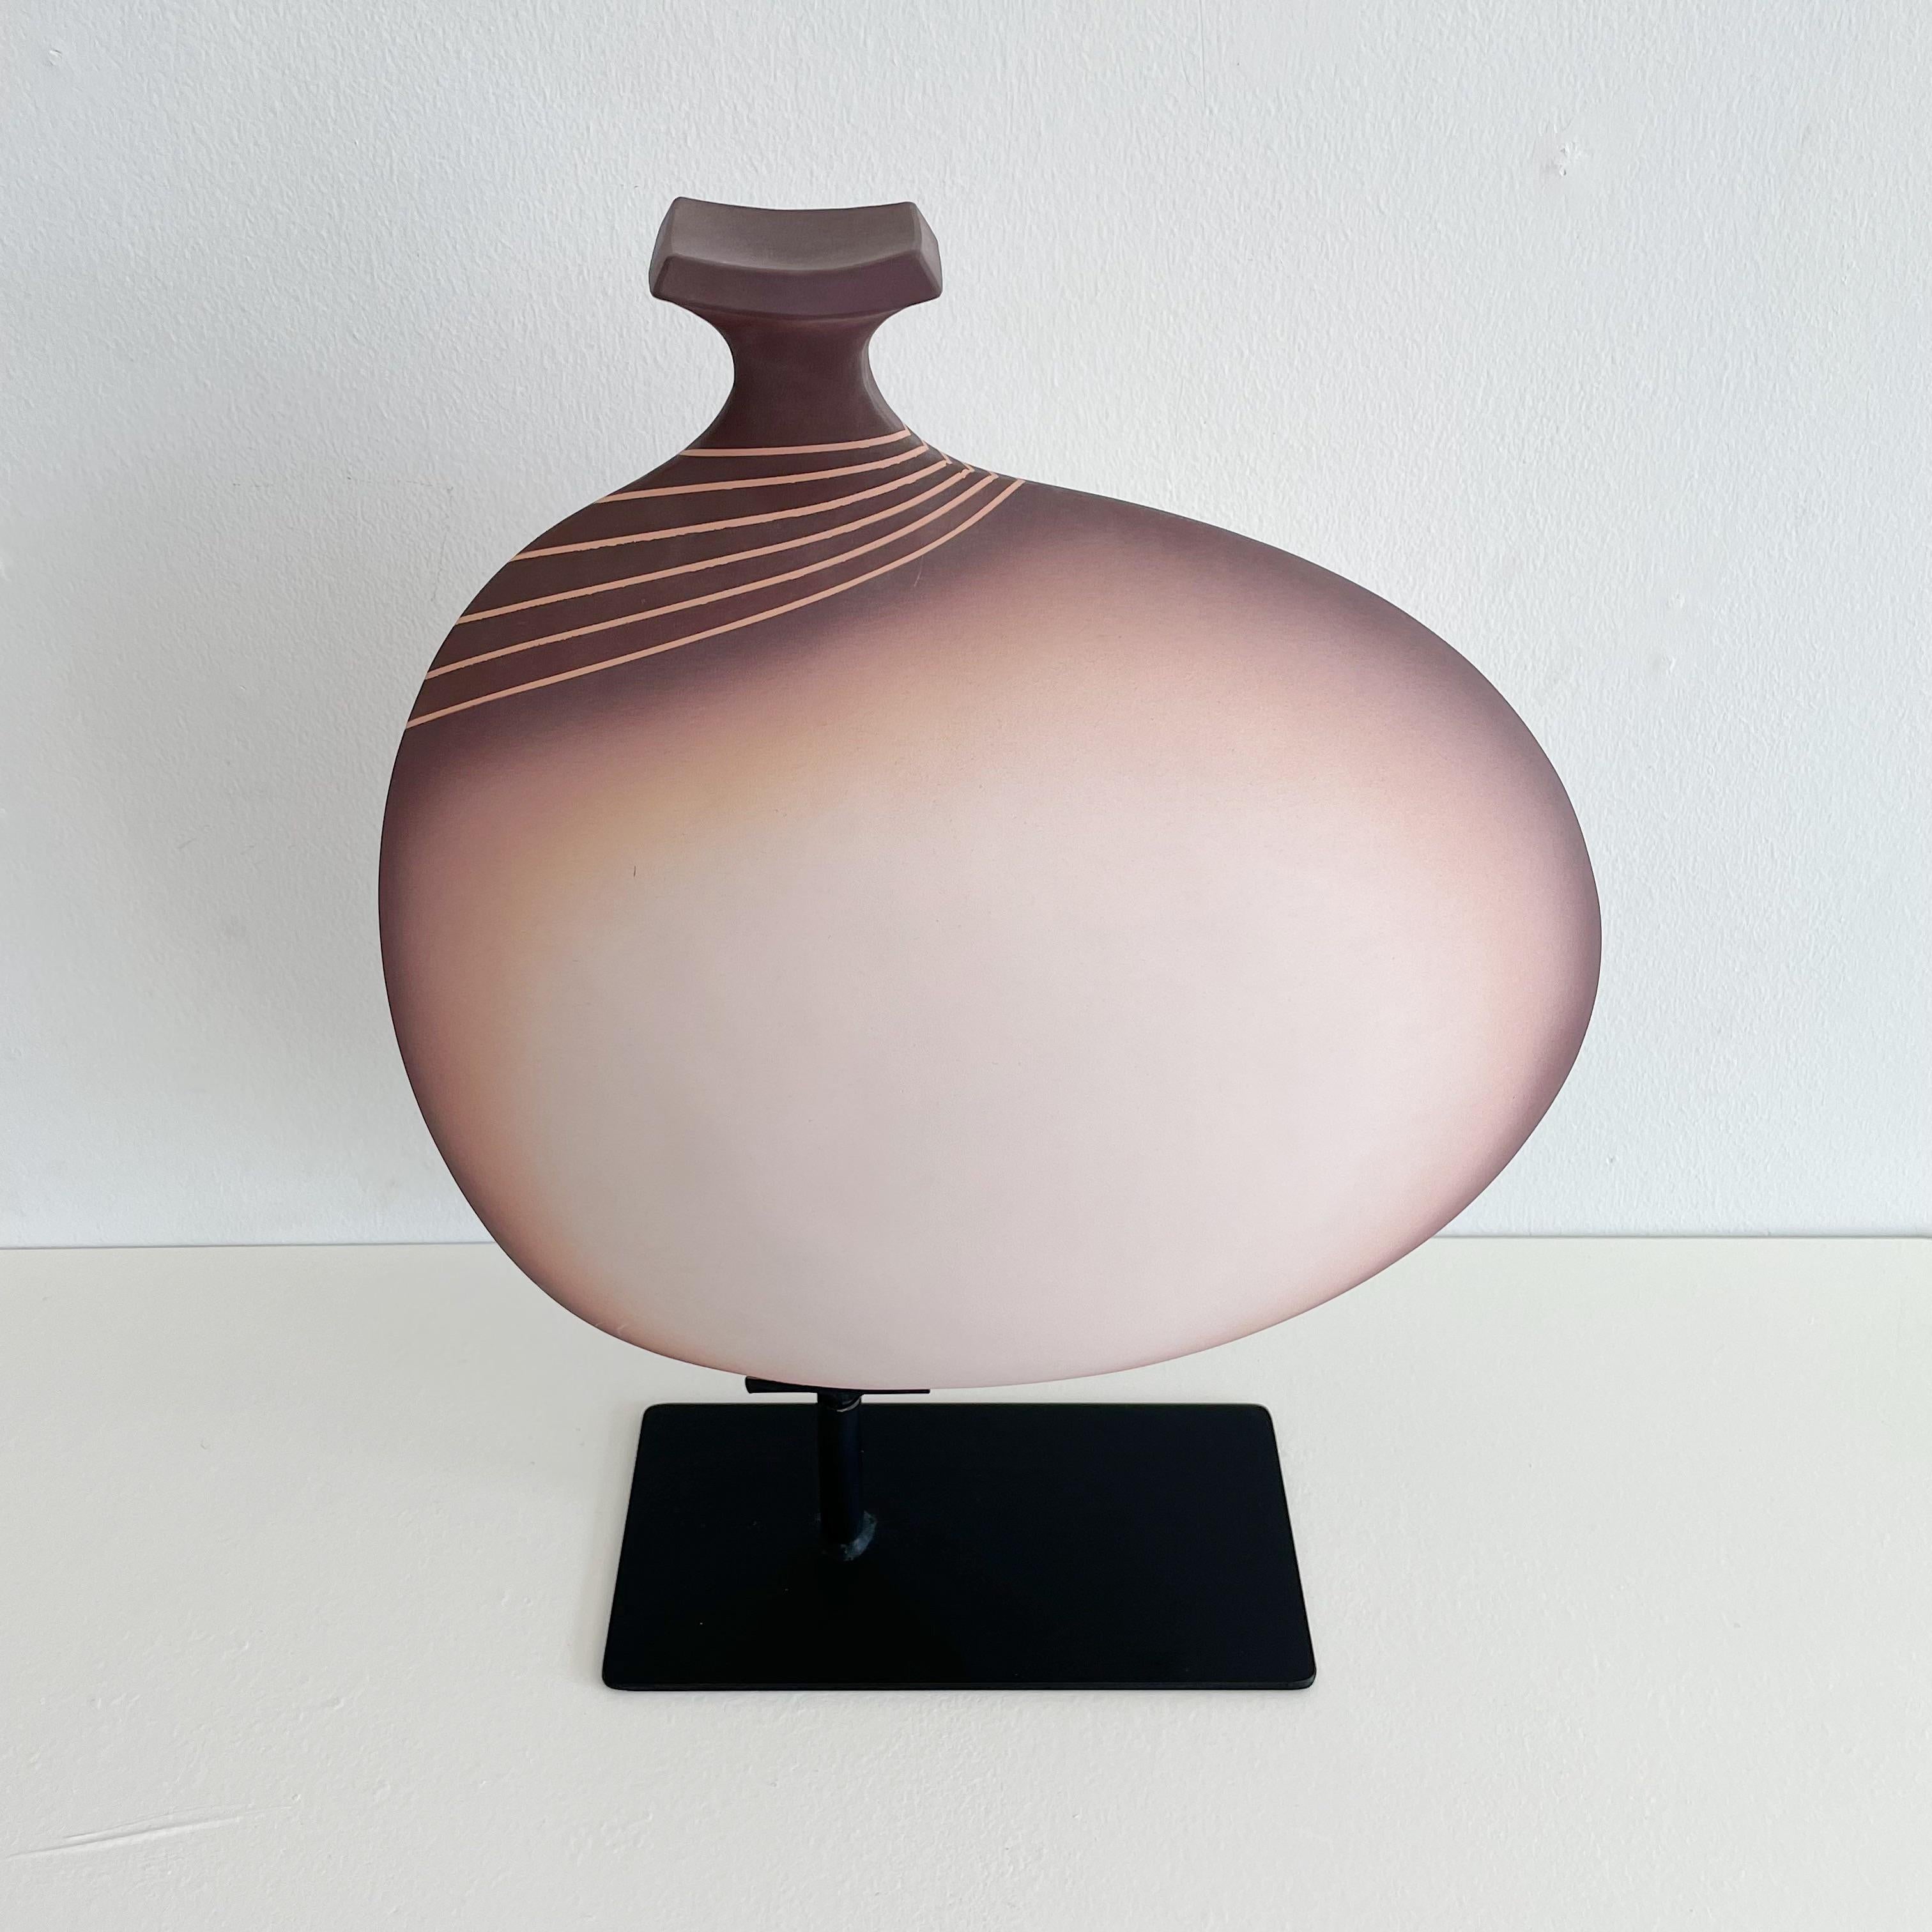 Carolyn Sale abstract postmodern airbrushed ceramic sculpture on black steel base. Signed. 1980s. California. This is a decorative vase sculpture and not a functional vessel as there are no openings.